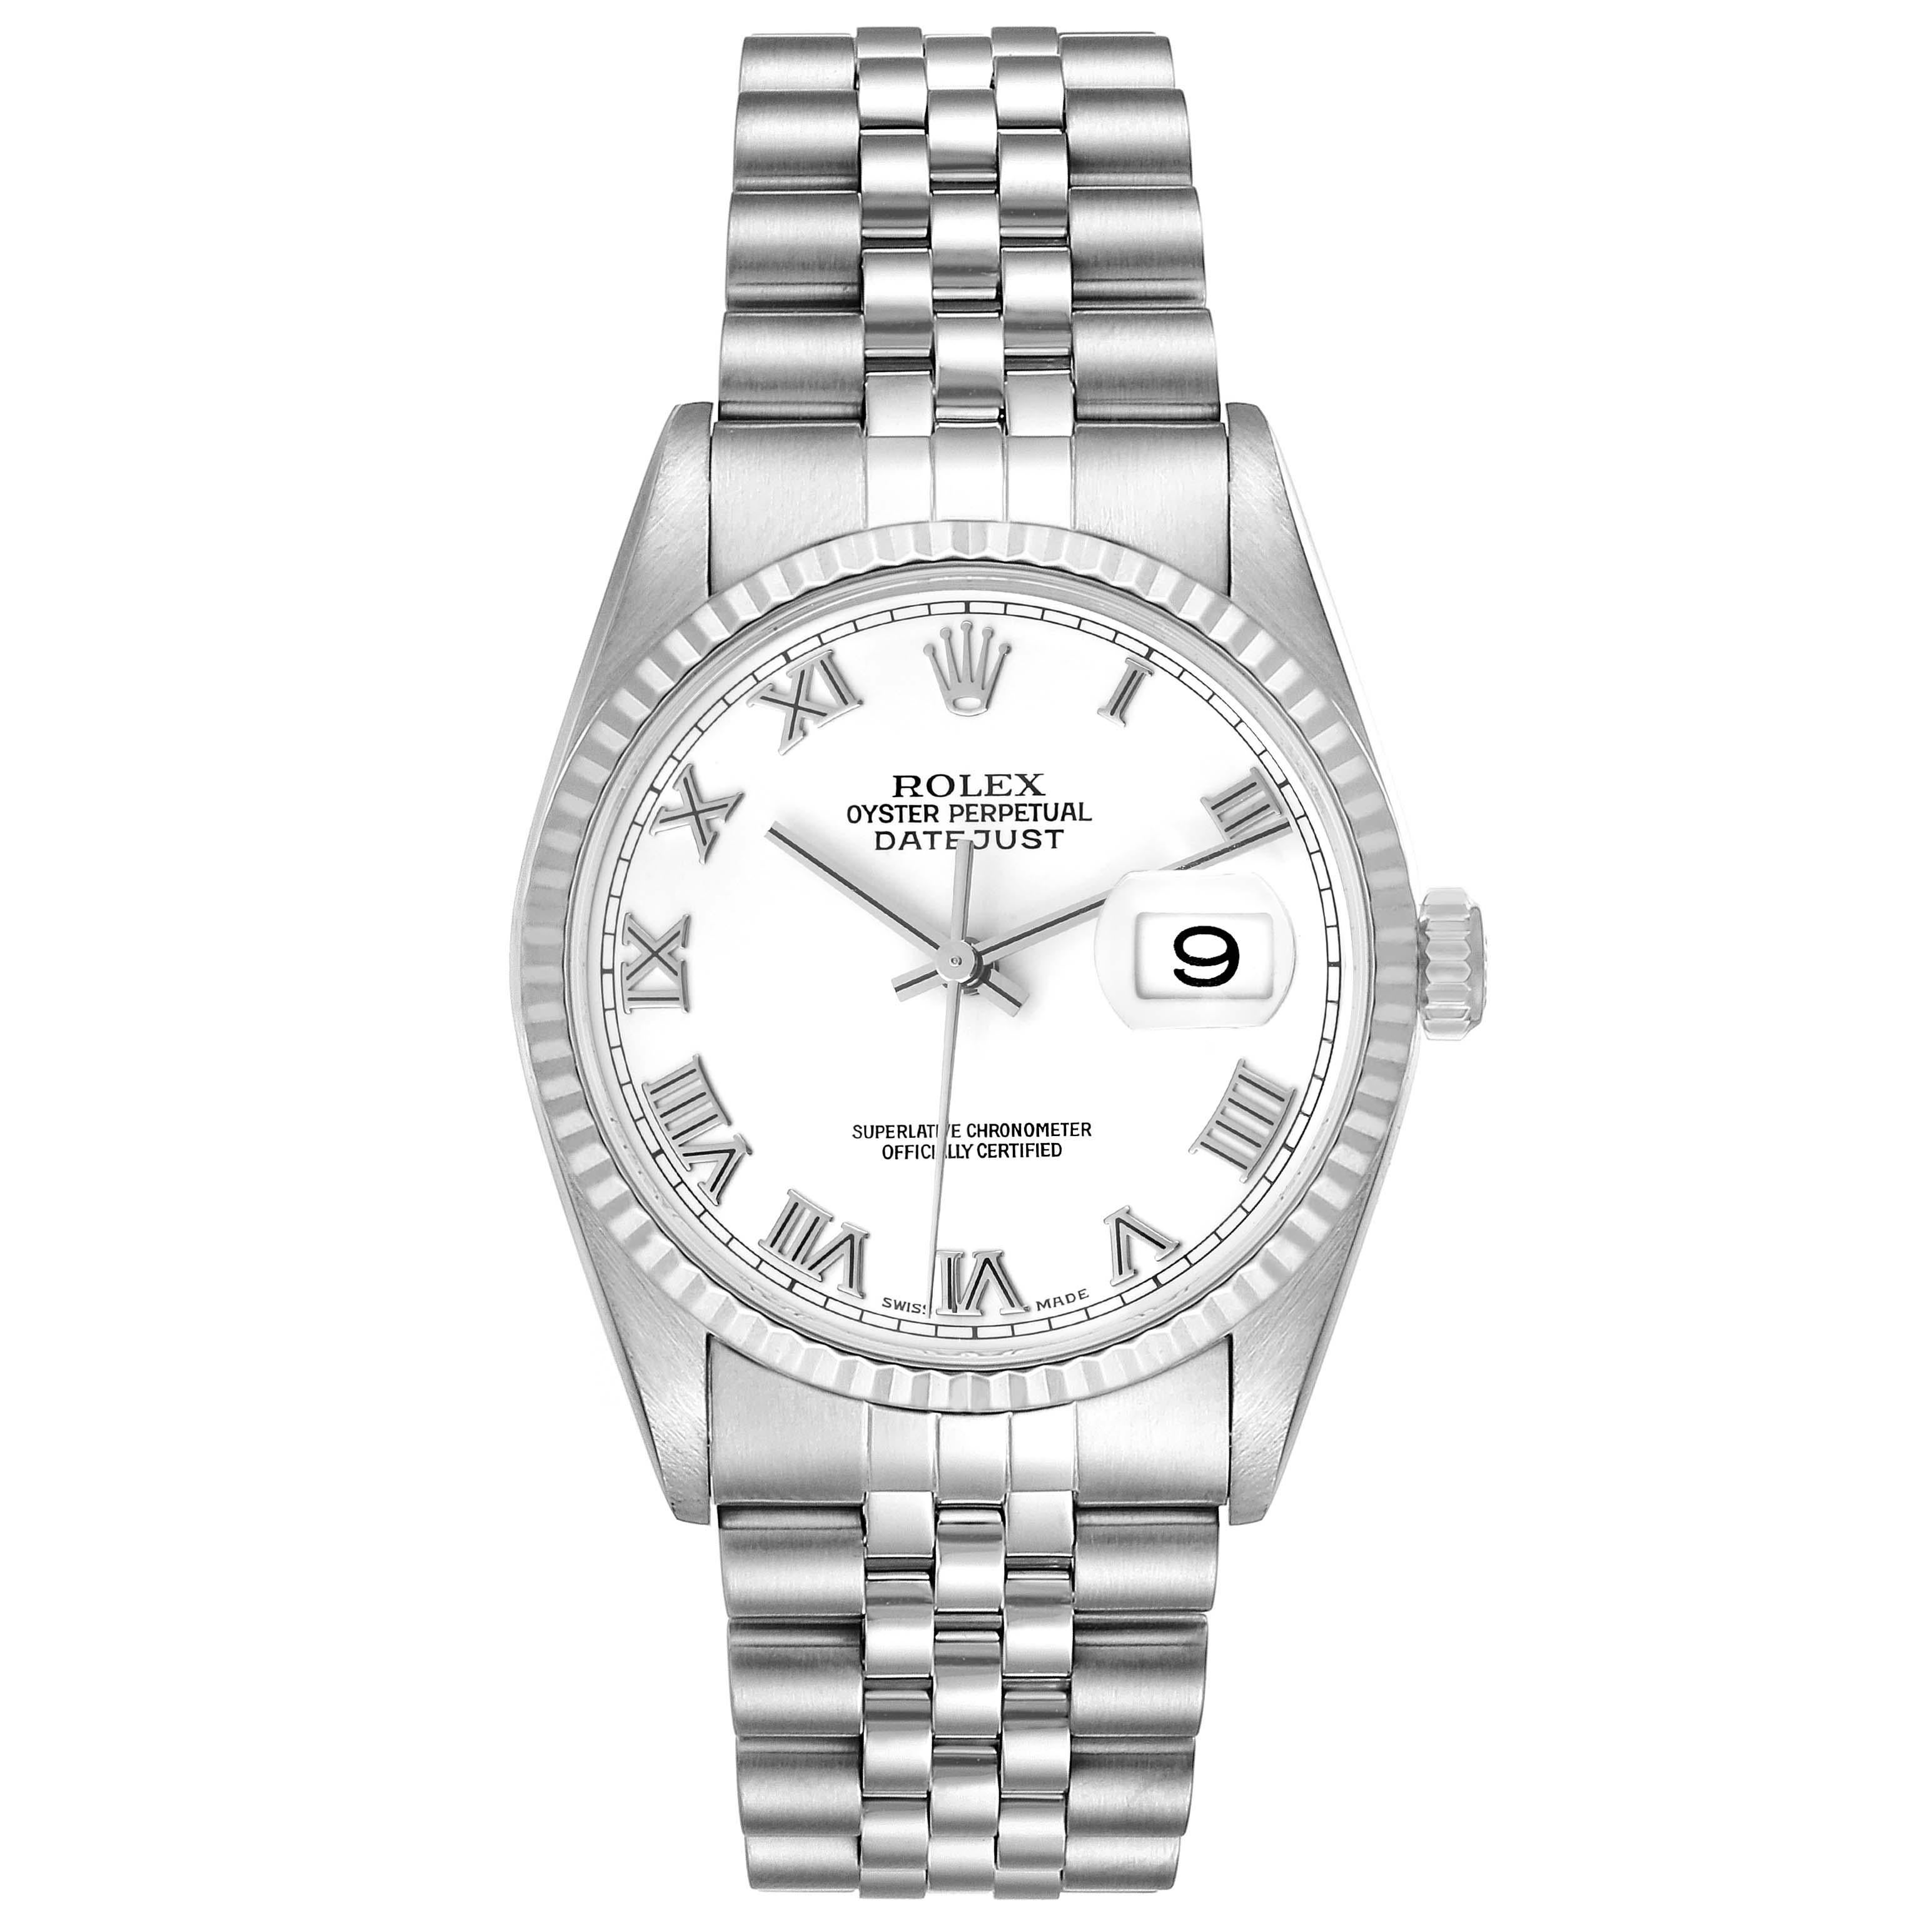 Rolex Datejust Steel White Gold Roman Dial Mens Watch 16234. Officially certified chronometer automatic self-winding movement. Stainless steel oyster case 36 mm in diameter. Rolex logo on the crown. 18k white gold fluted bezel. Scratch resistant